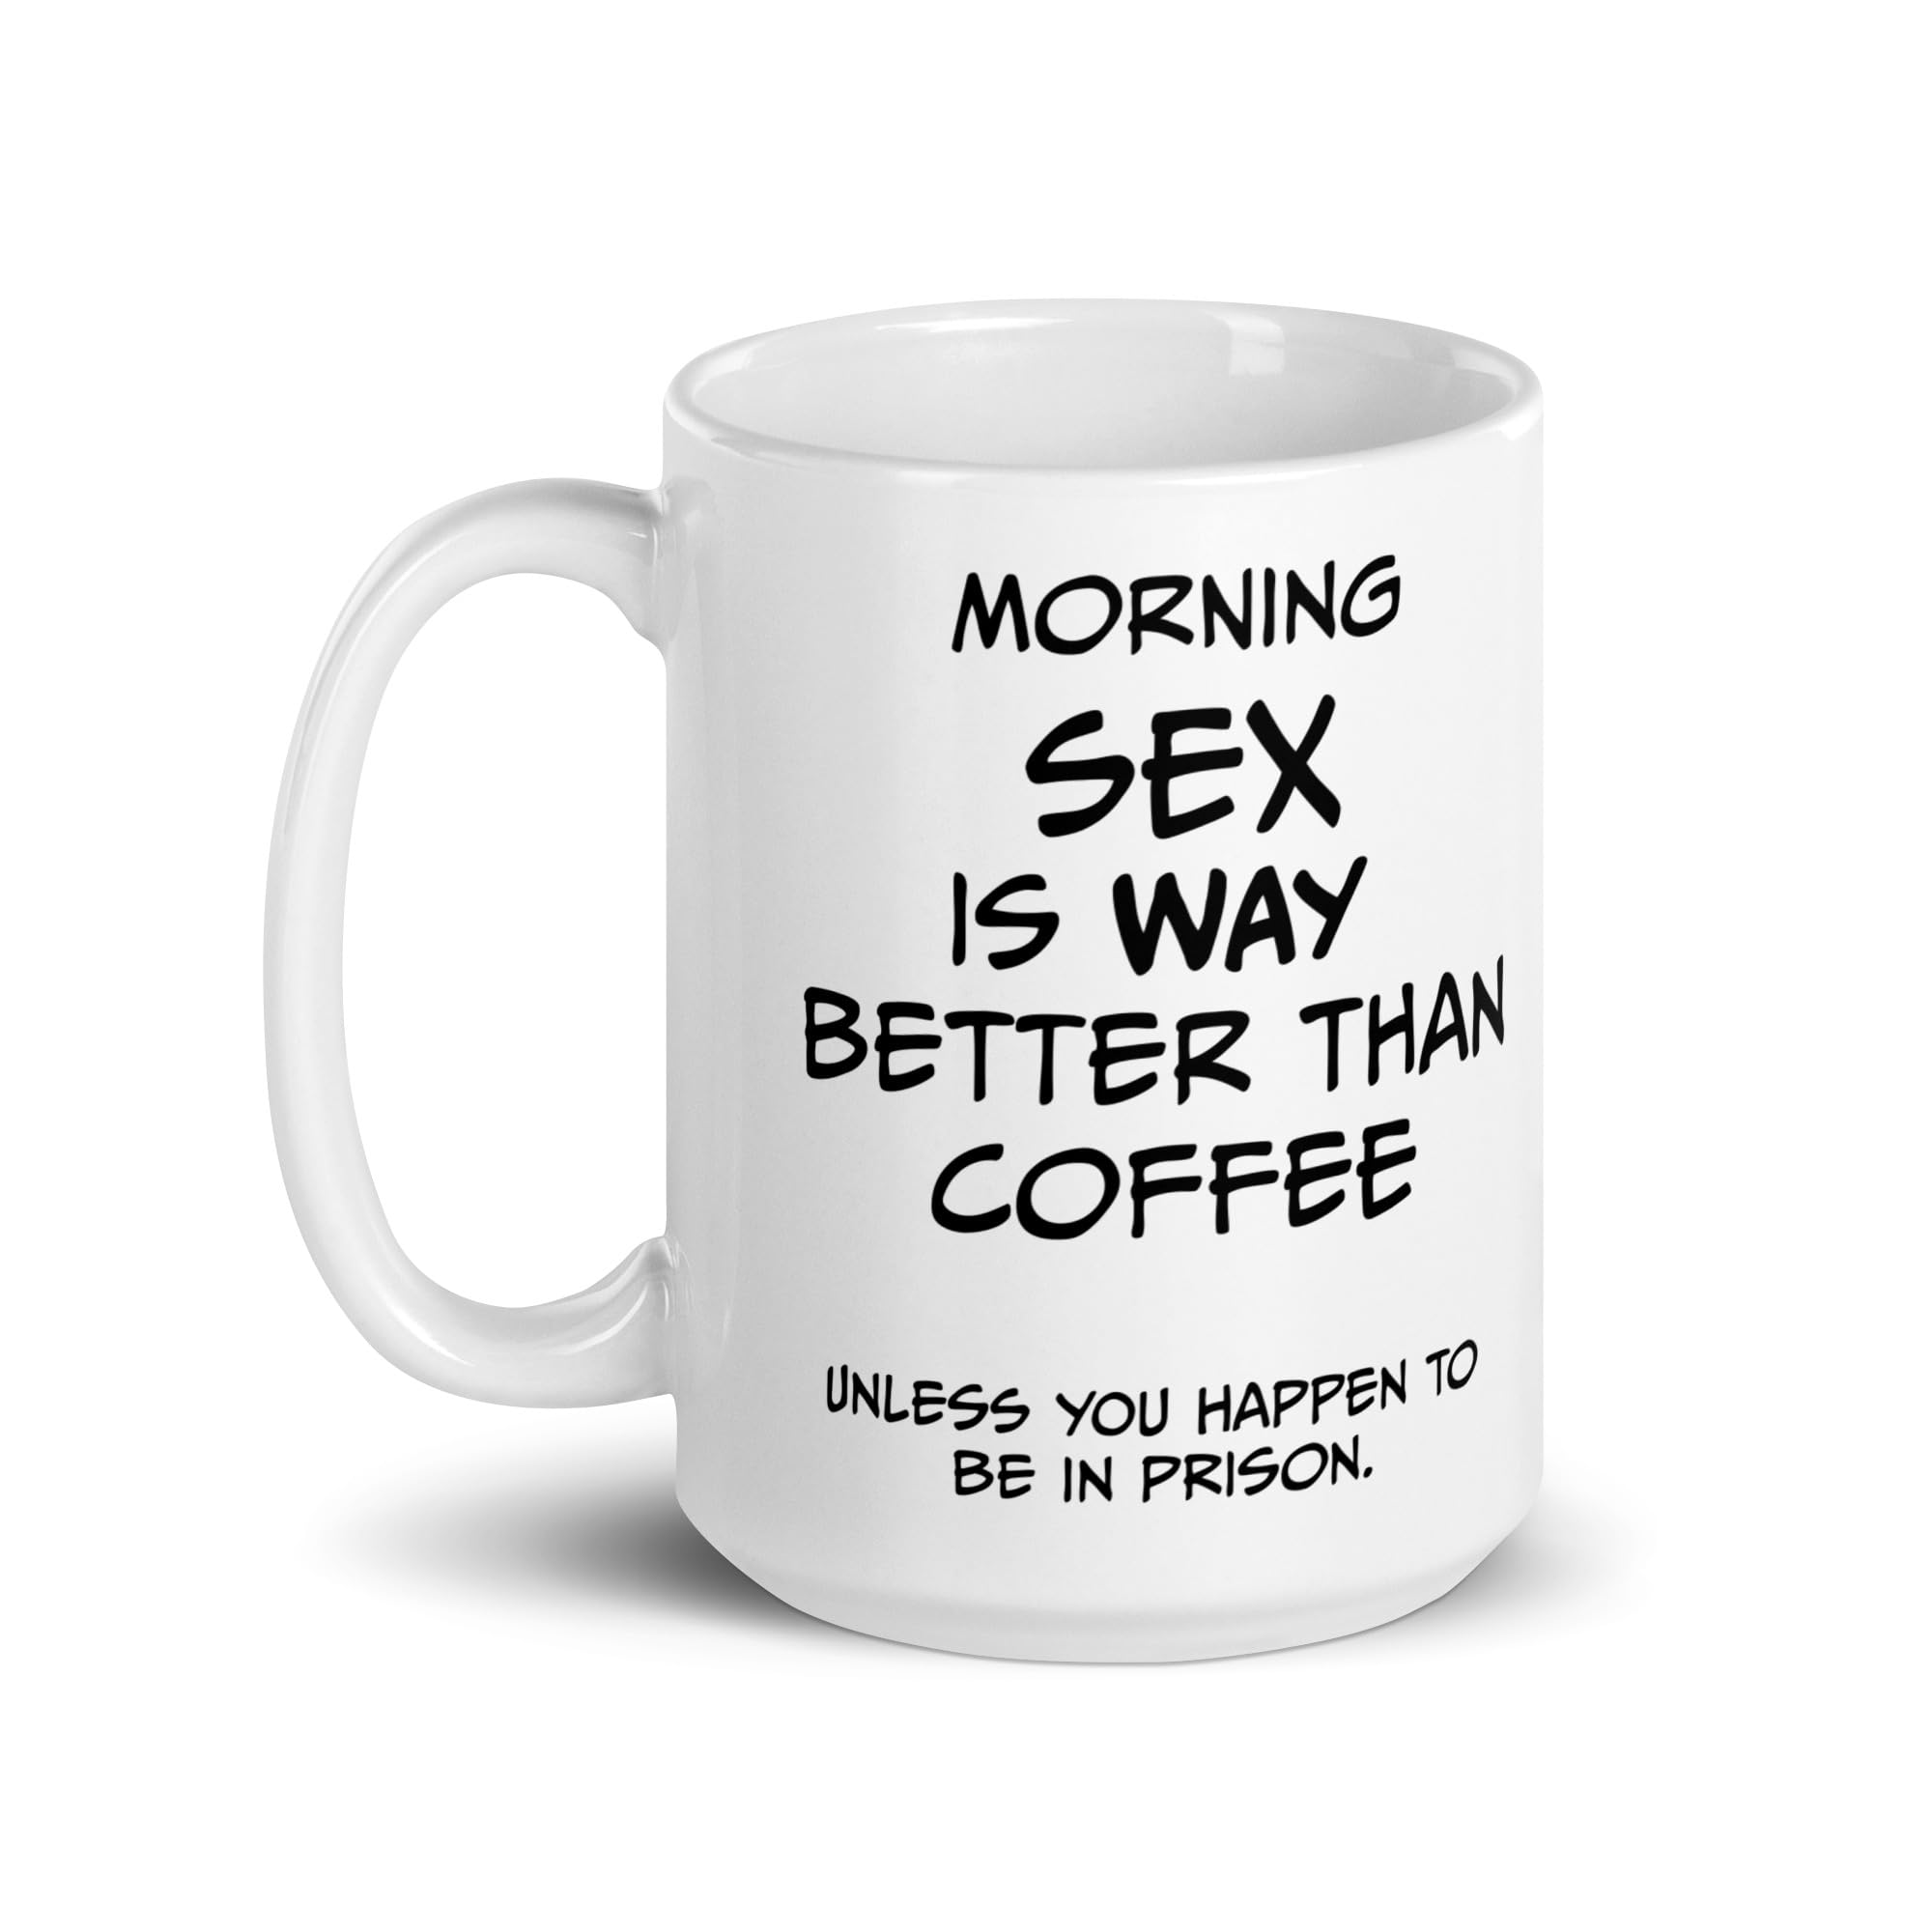 Morning SEX is WAY better than coffee.. Unless you happen to be in prison - White glossy mug. gift,11oz,15oz,Christmas Present,Fathers day,Mothers Day,funny,Coffee Mug (11 ounce)